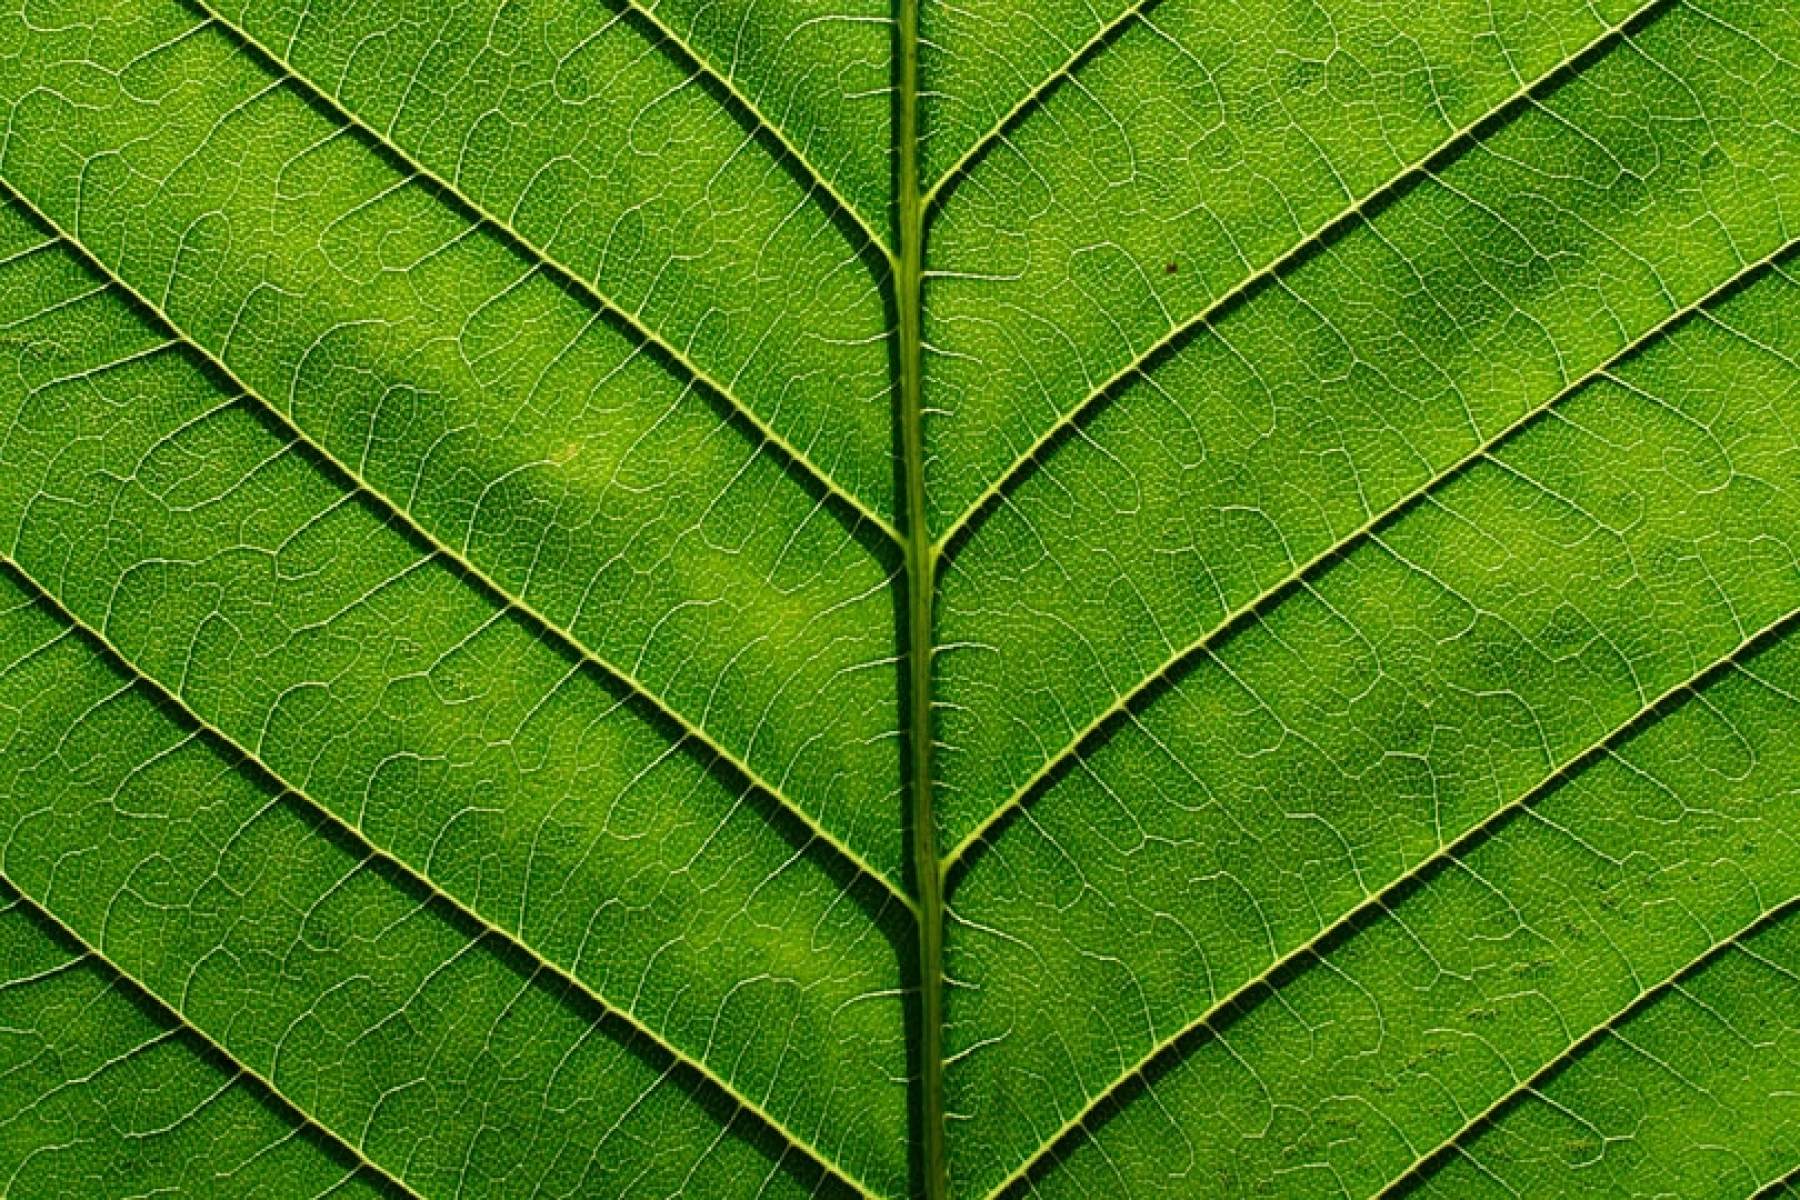 Veins in a Horse Chestnut leaf demonstrate efficient branching patterns that follow Murray's law.